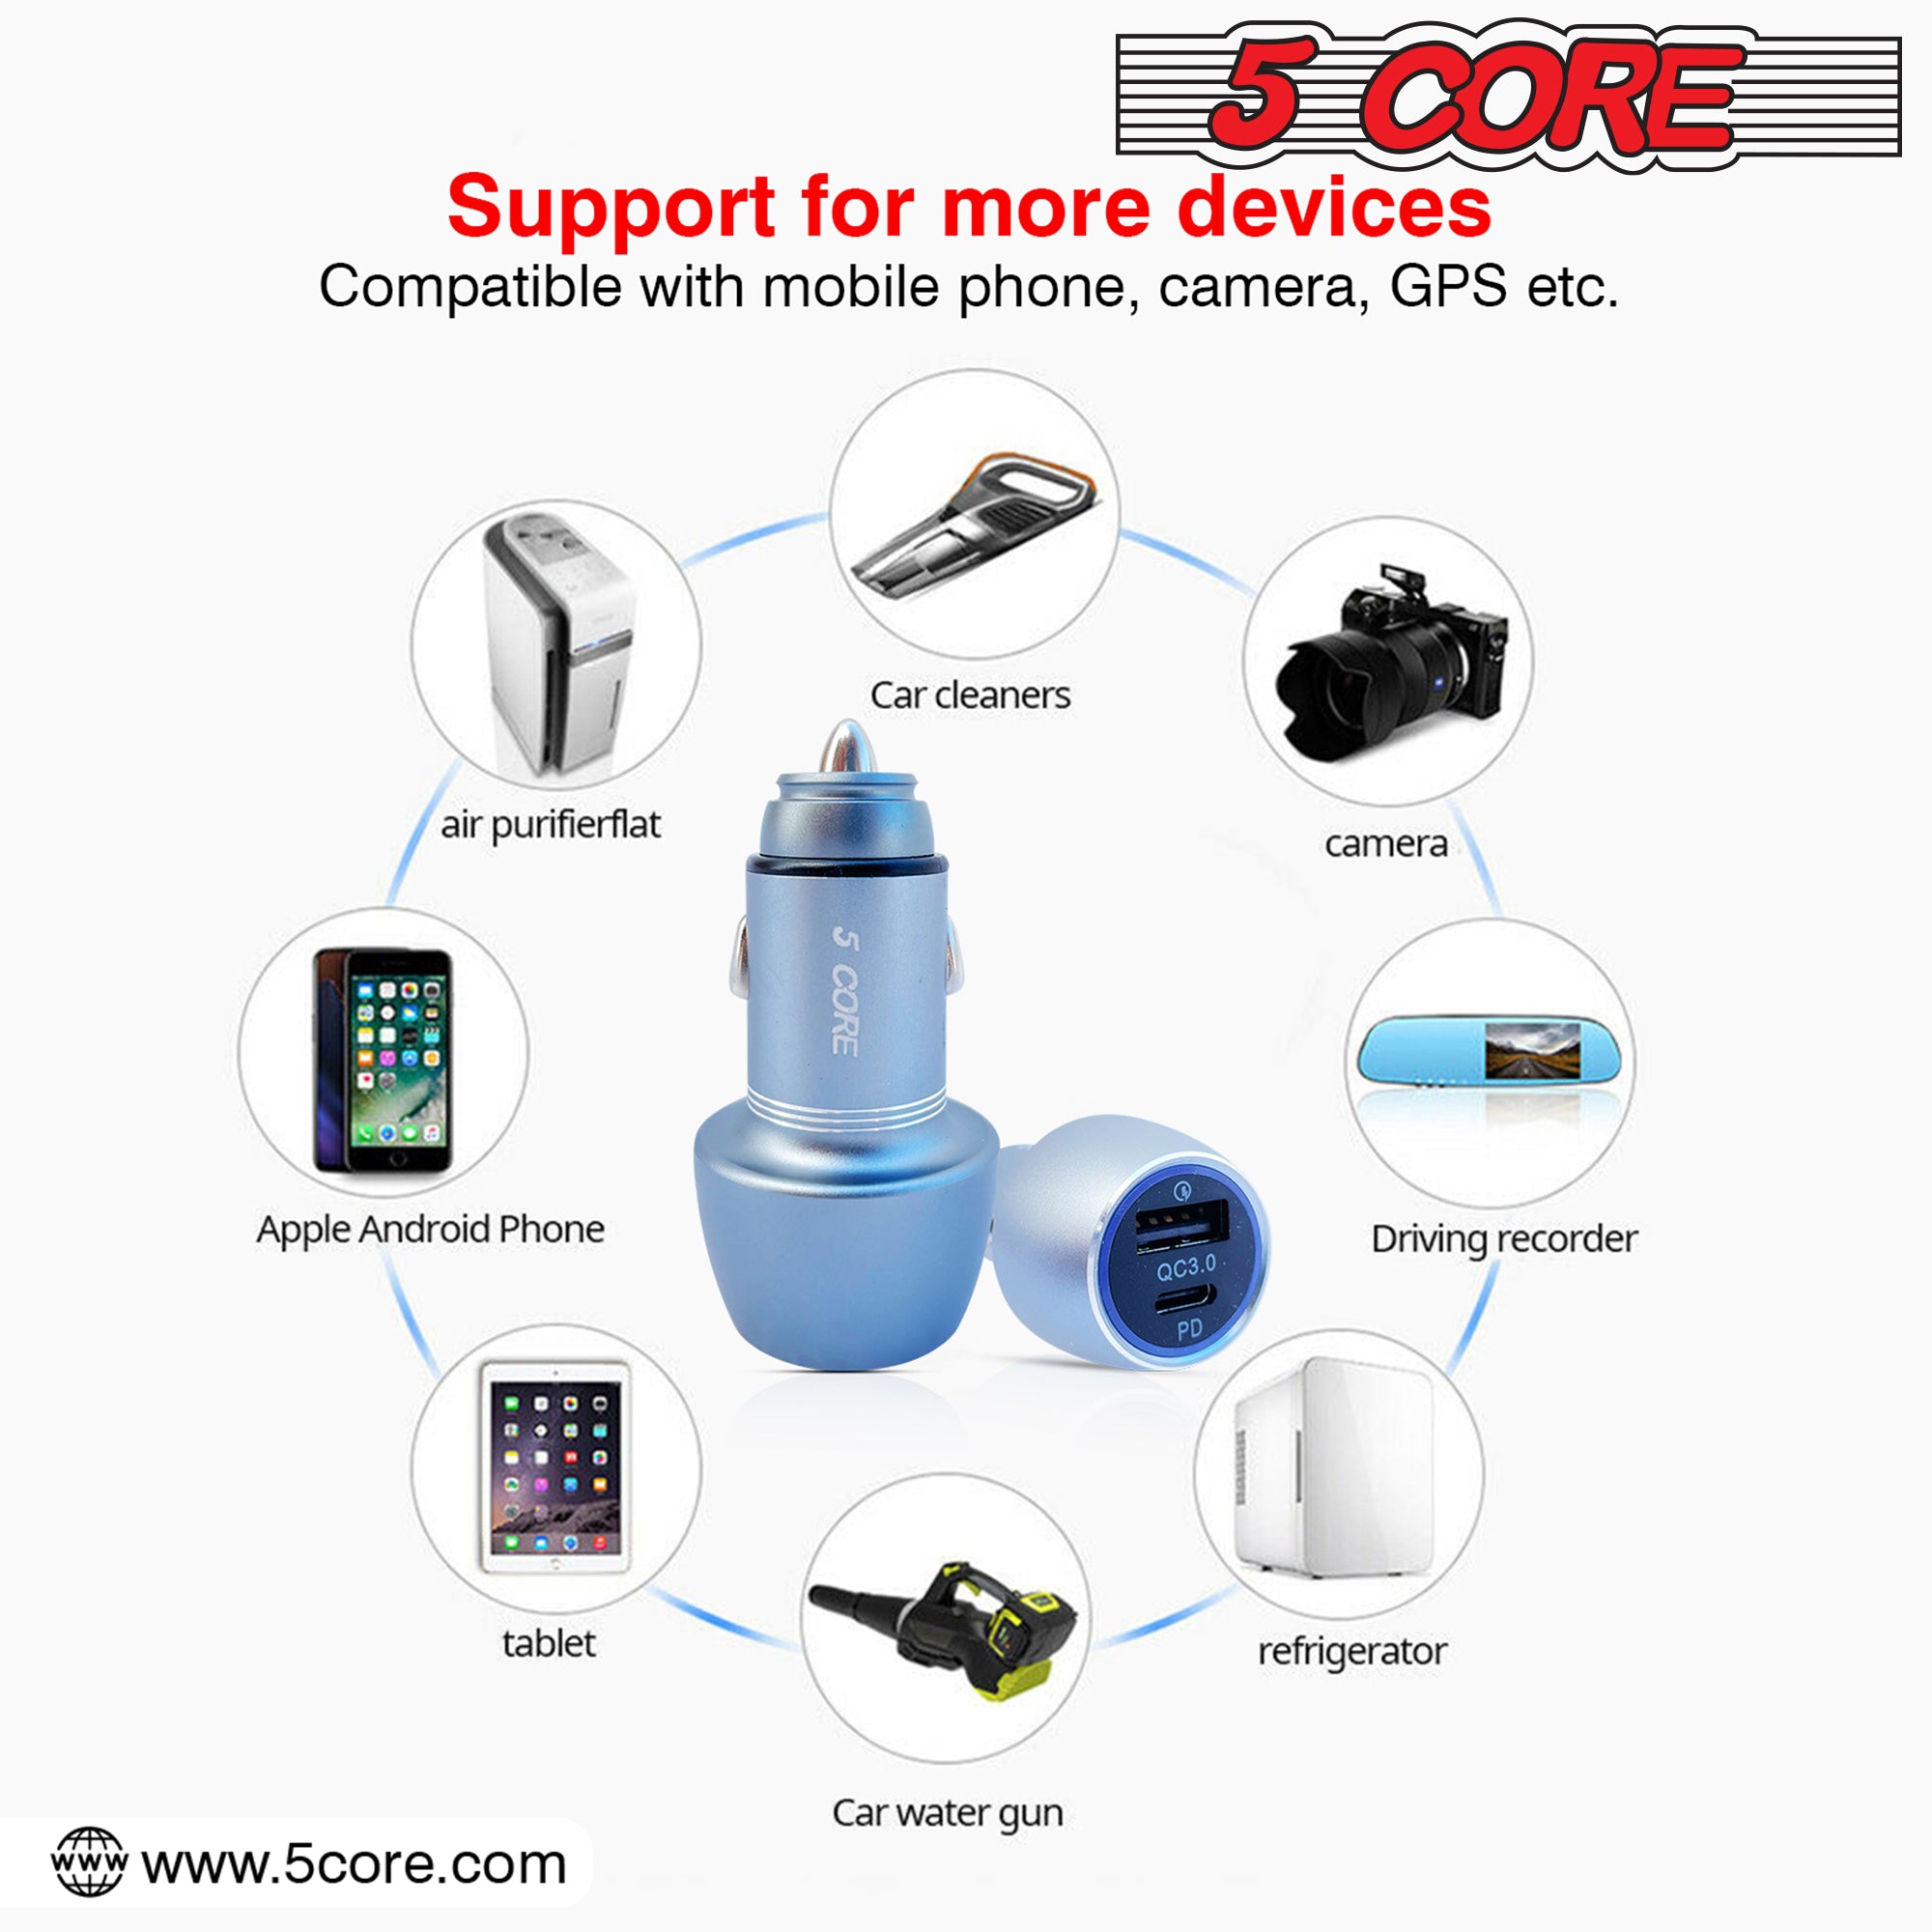 5 Core USB Car Charger 2 Pack Cigarette Lighter Adapter 1 USB 1 Type C Port QC 3.0 36W Fast Charging